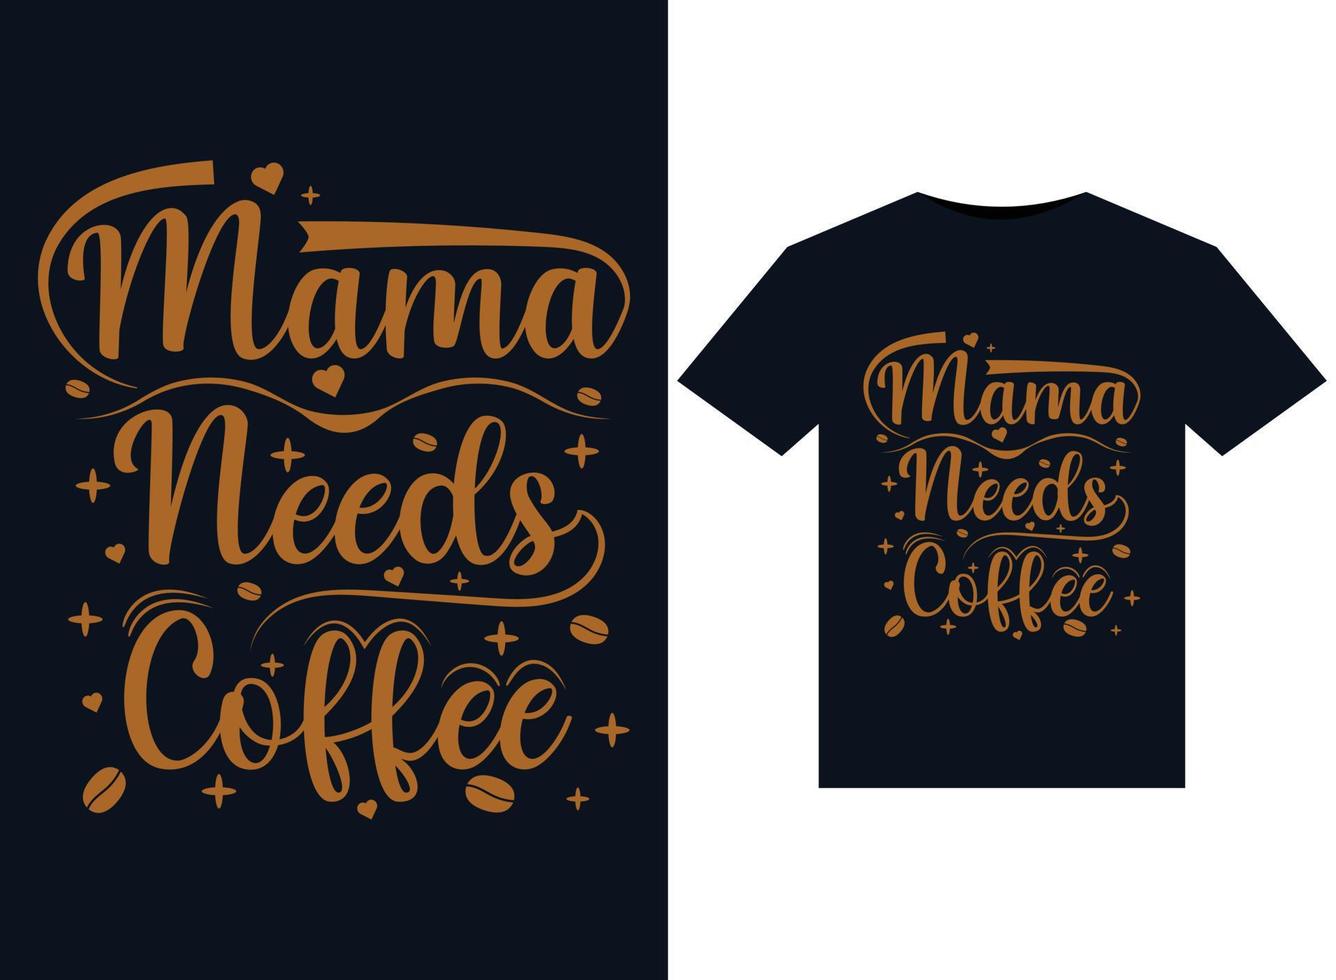 Mama needs coffee illustrations for print-ready T-Shirts design vector